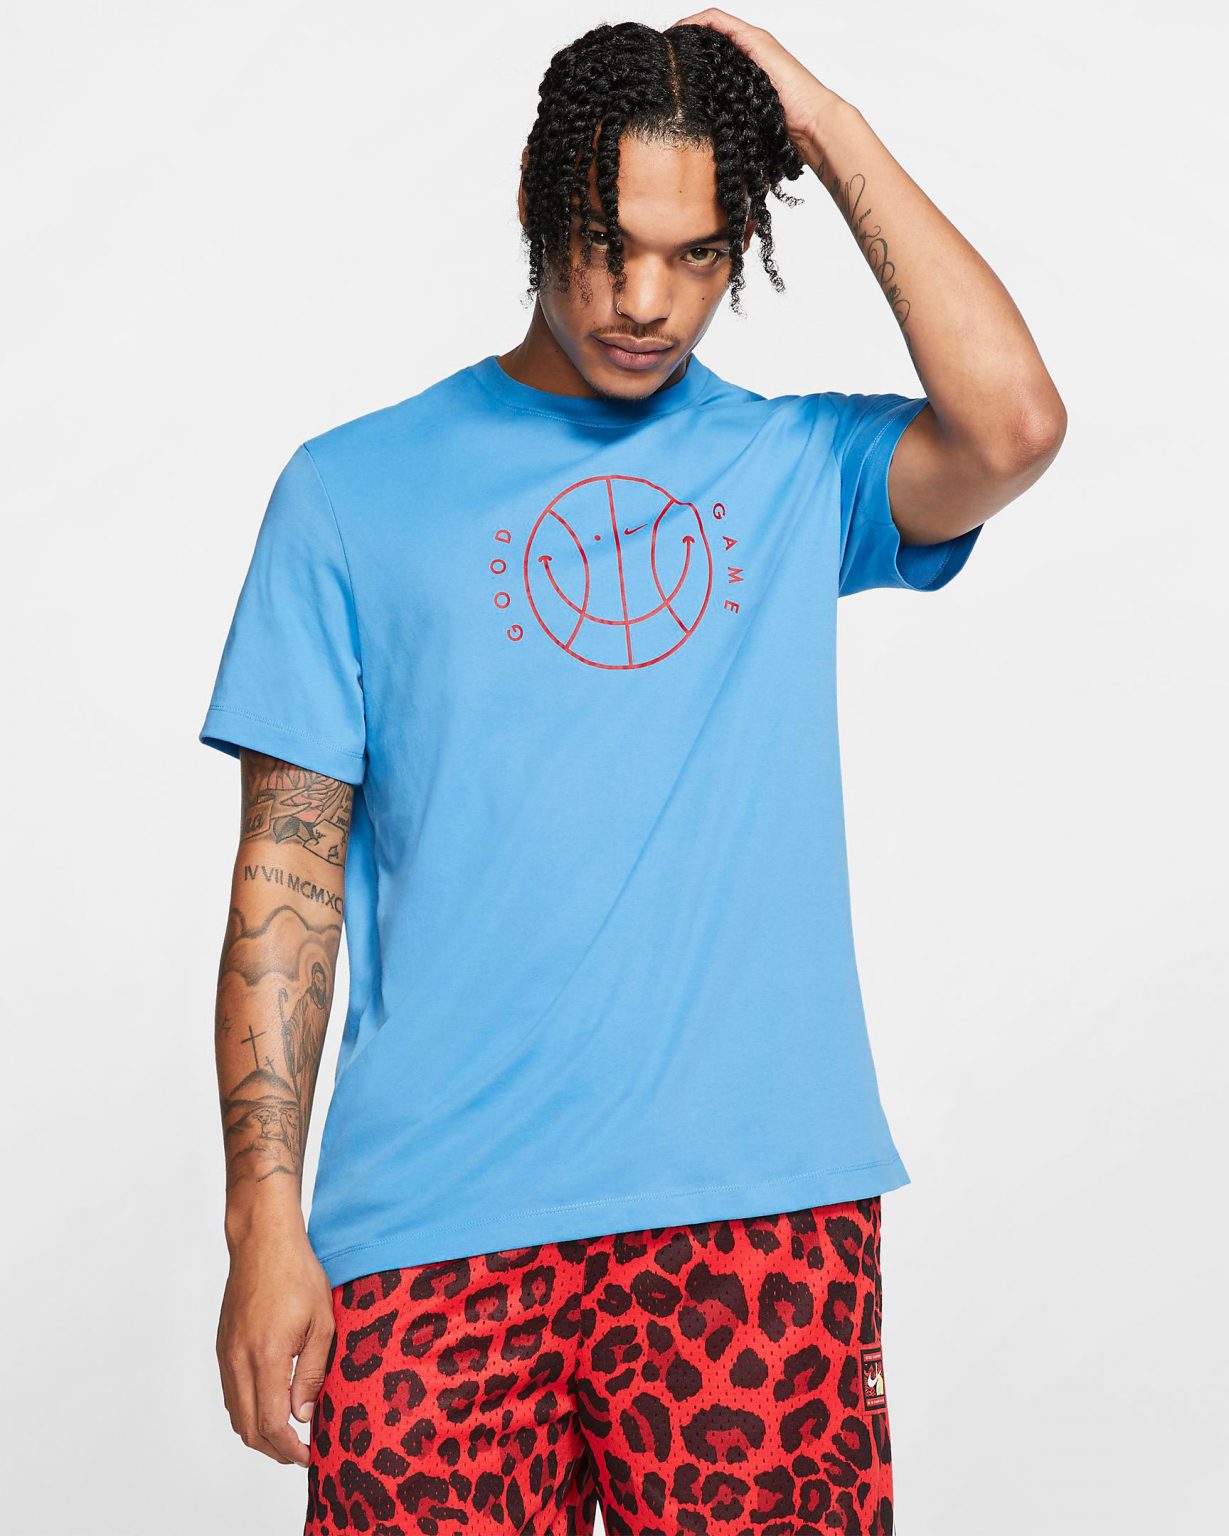 Nike Kyrie 6 Chinese New Year Shirts | SneakerFits.com